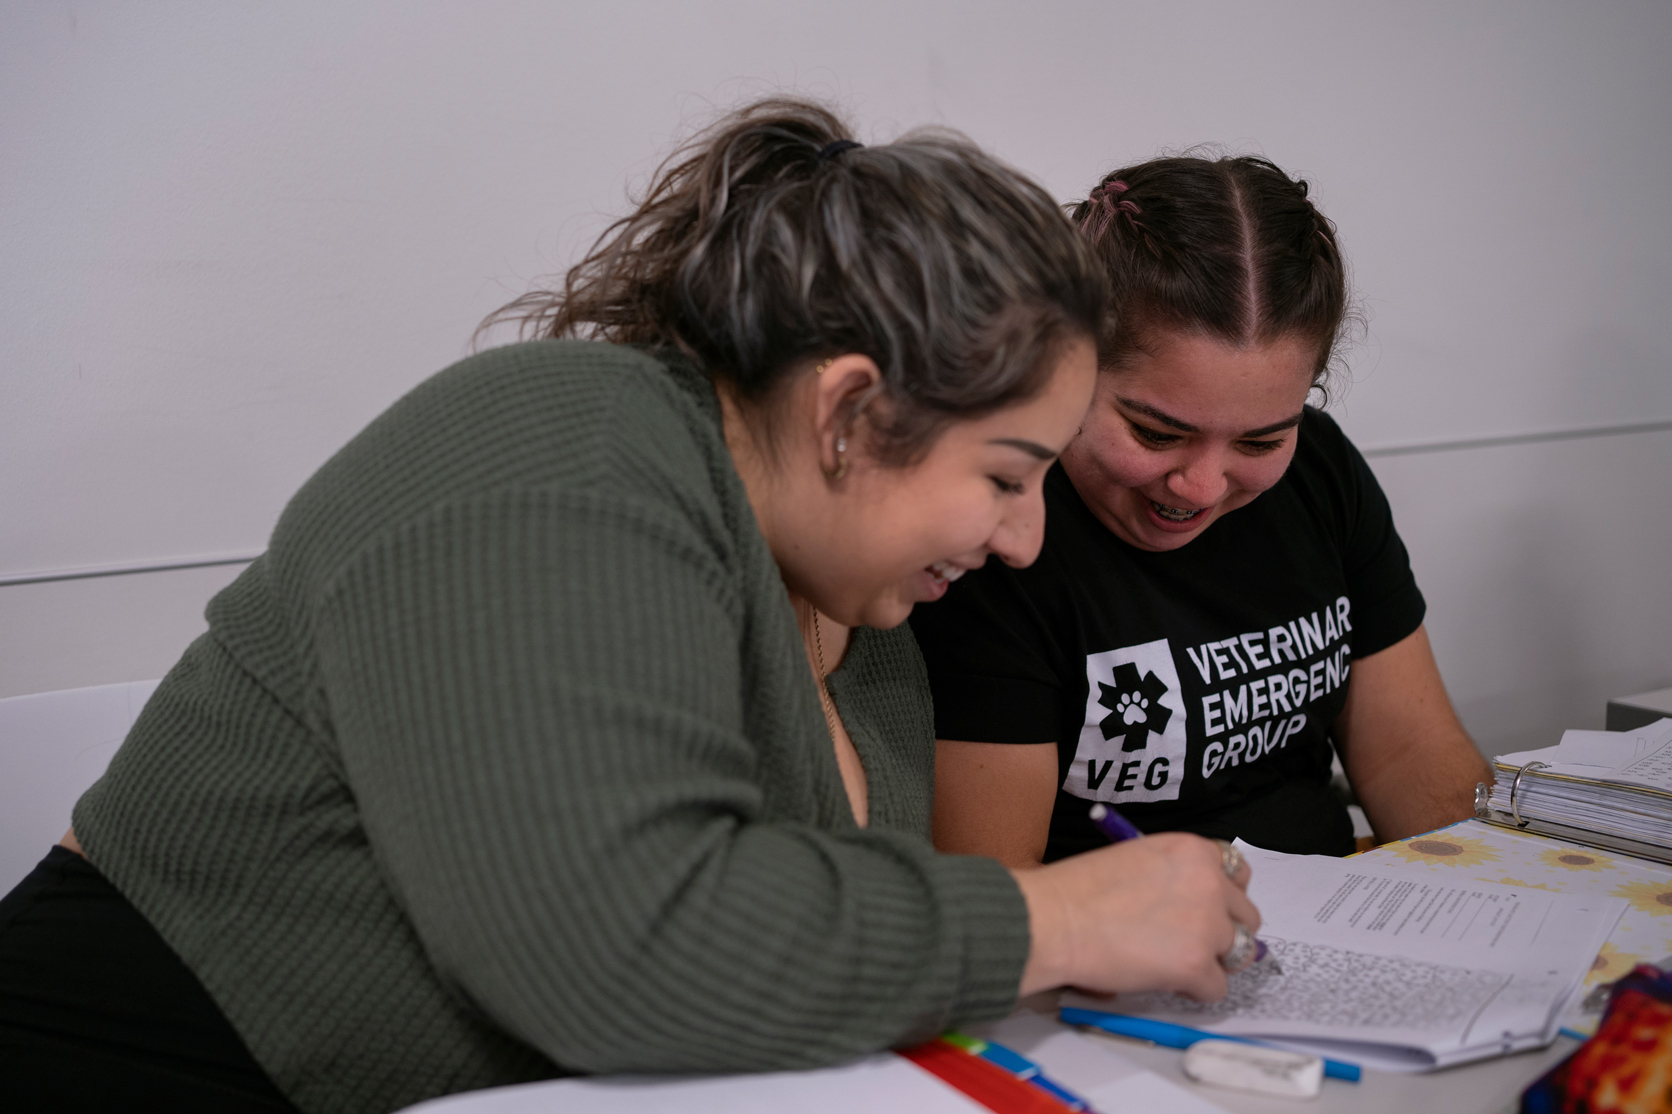 Diana Villalobos, left, and Kamila Salazar, right, work together on an exercise during a teacher-certification class with seniors at the University of Houston.